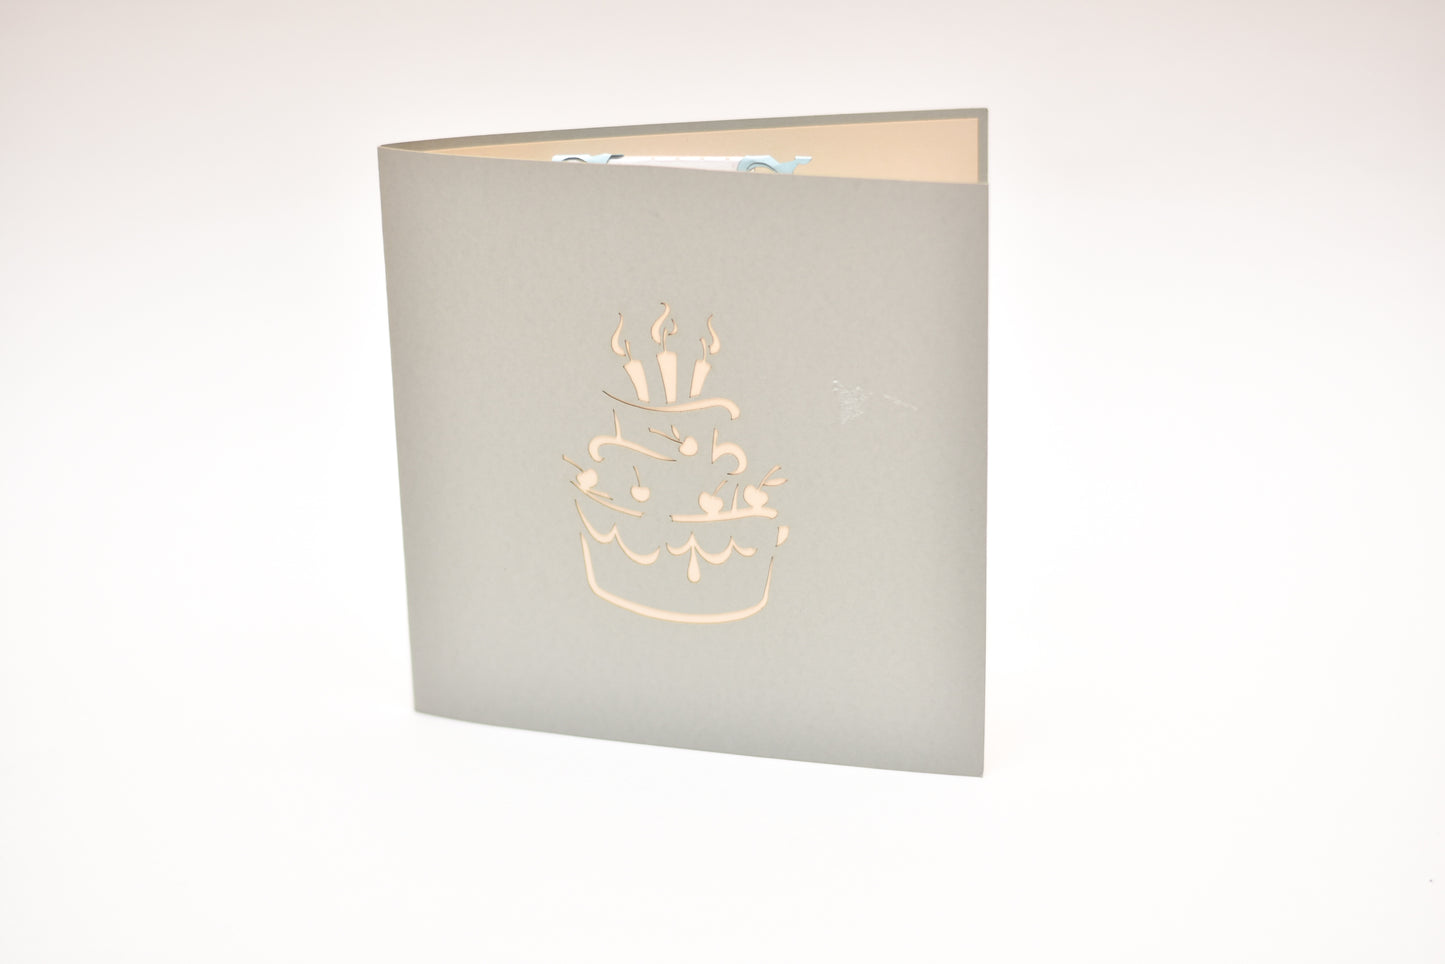 Light grey card with outline of birthday cake with candles on the front cover